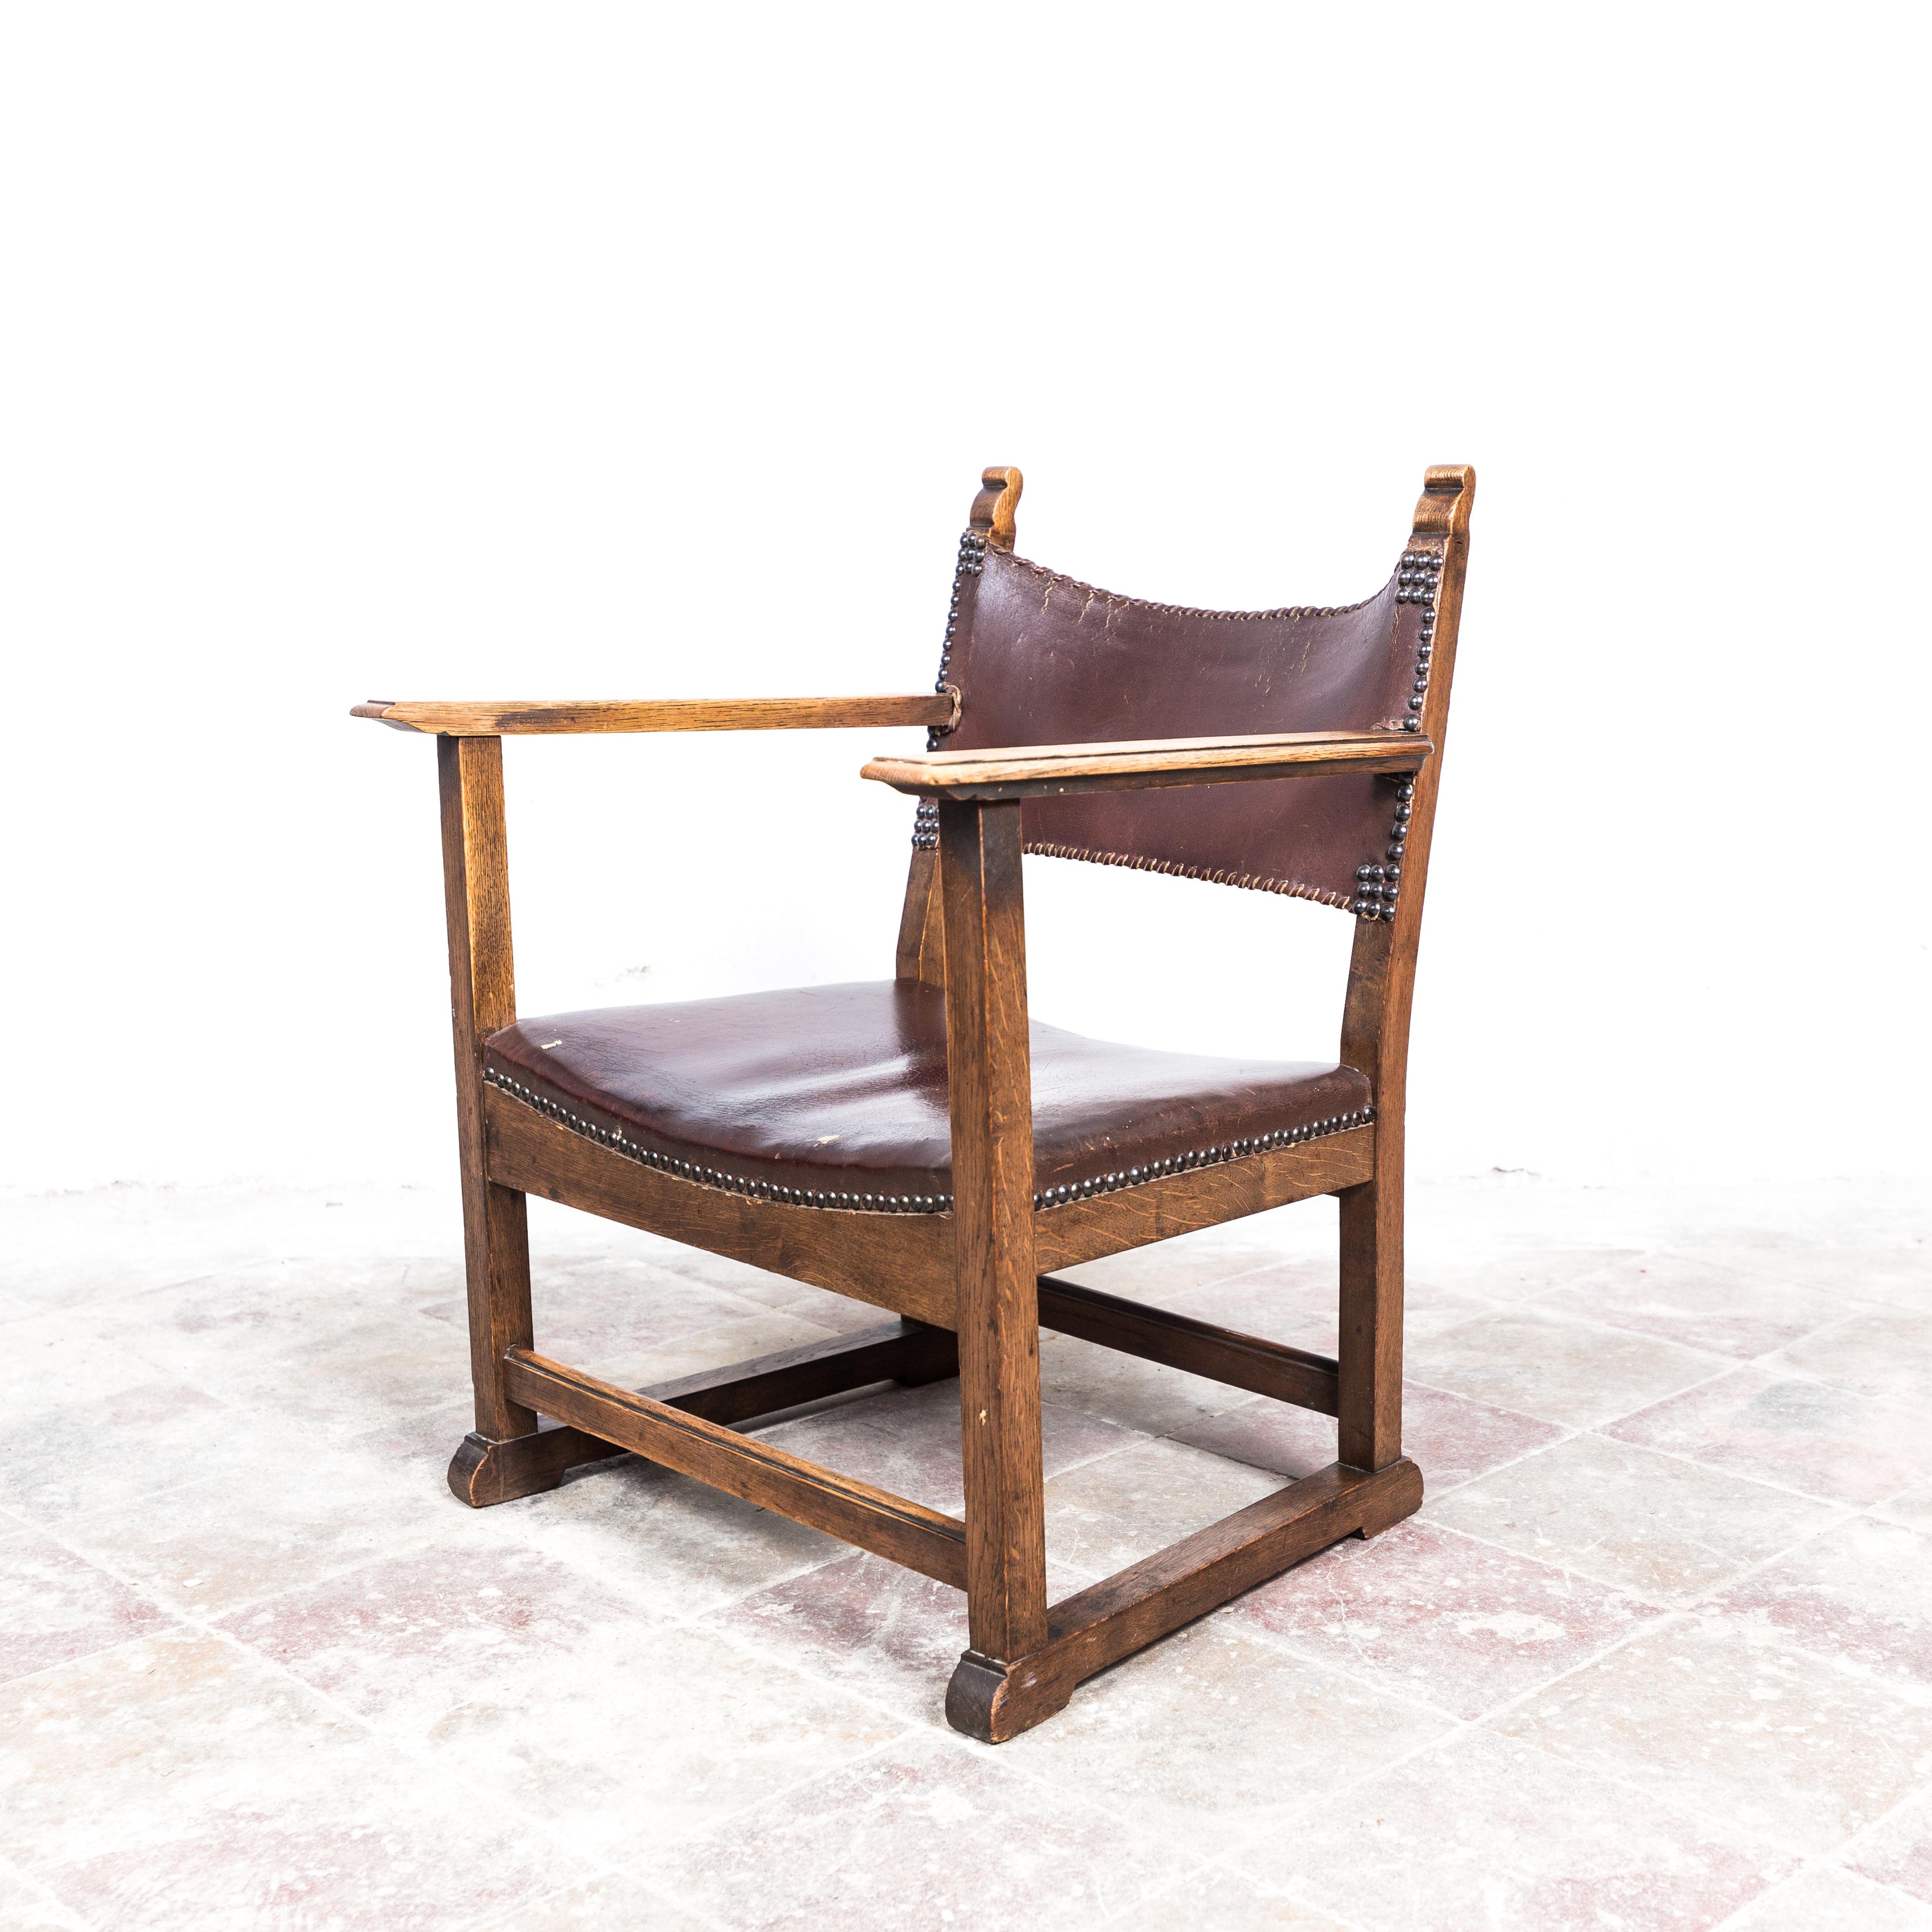 Designed by Heinrich Kulka, Adolf Loos's closest co-worker. Manufactured either by Thonet or F.O. Schmidt c. 1931. Solid walnut with brown leather, in good original condition. Adolf Loos used this model in 1931/32 for the music room in the apartment